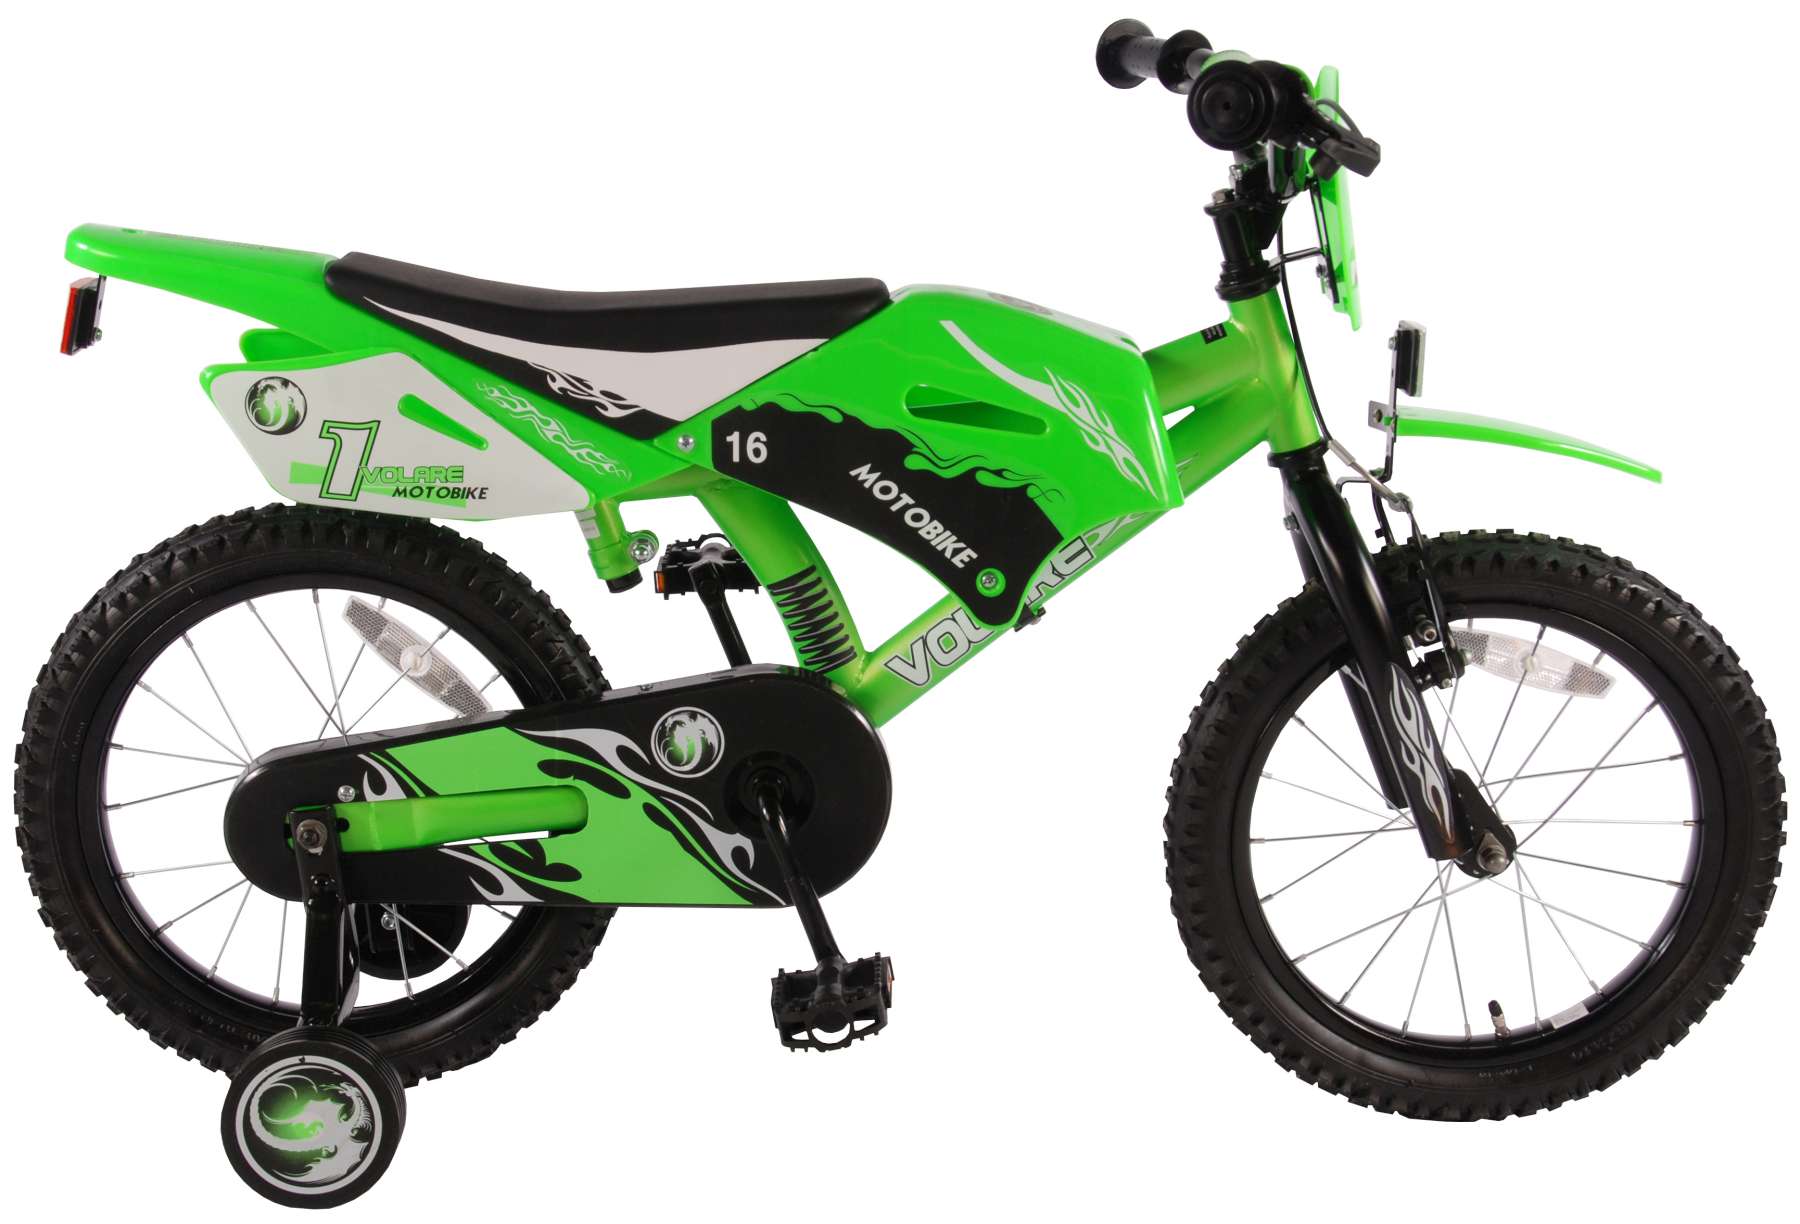 Motorcycle Bicycles Details about   14-16 Inch Children's Bicycles For Boys 2-9 years old 